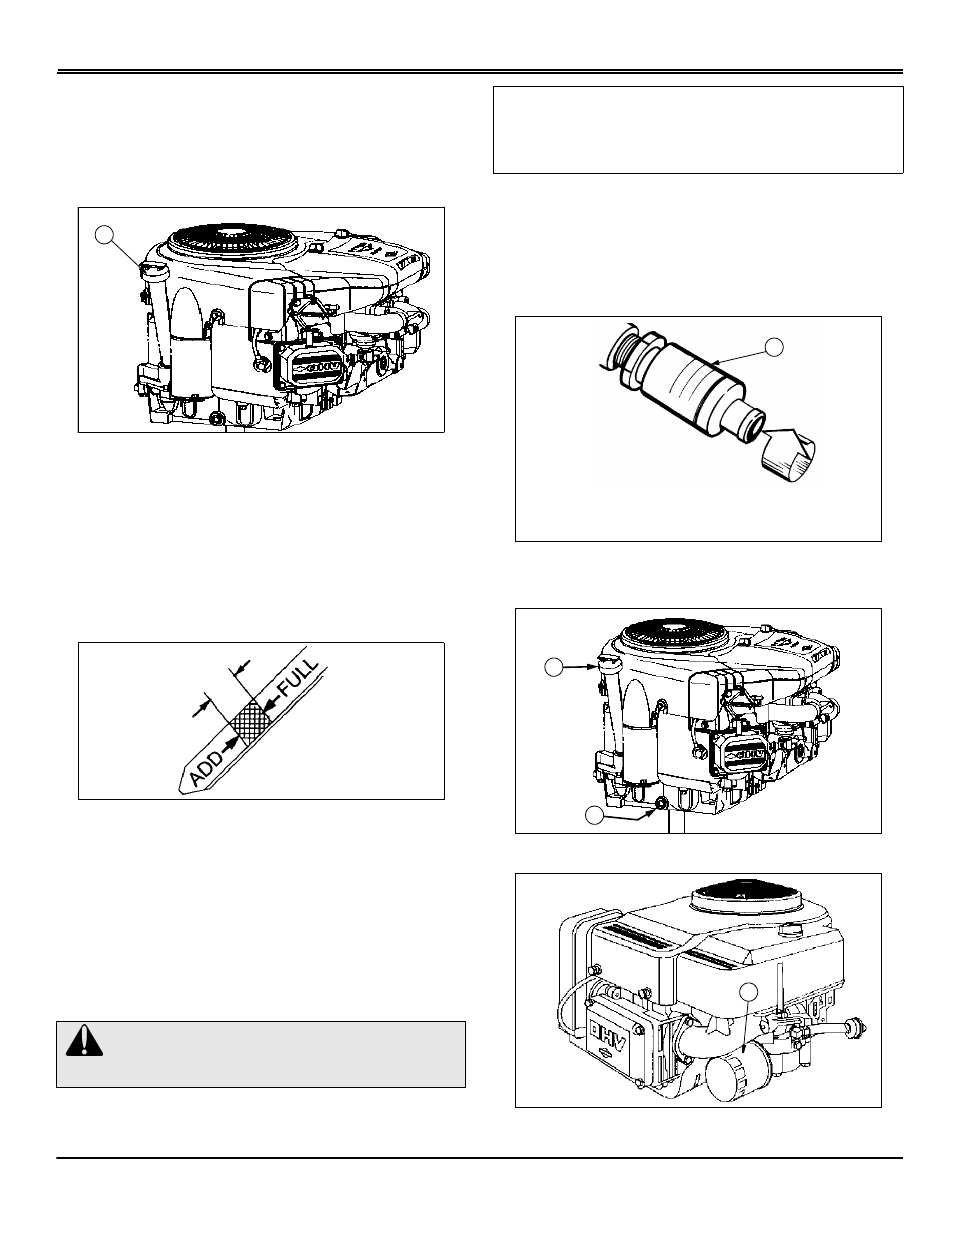 Service engine | Scotts S1642 User Manual | Page 32 / 72